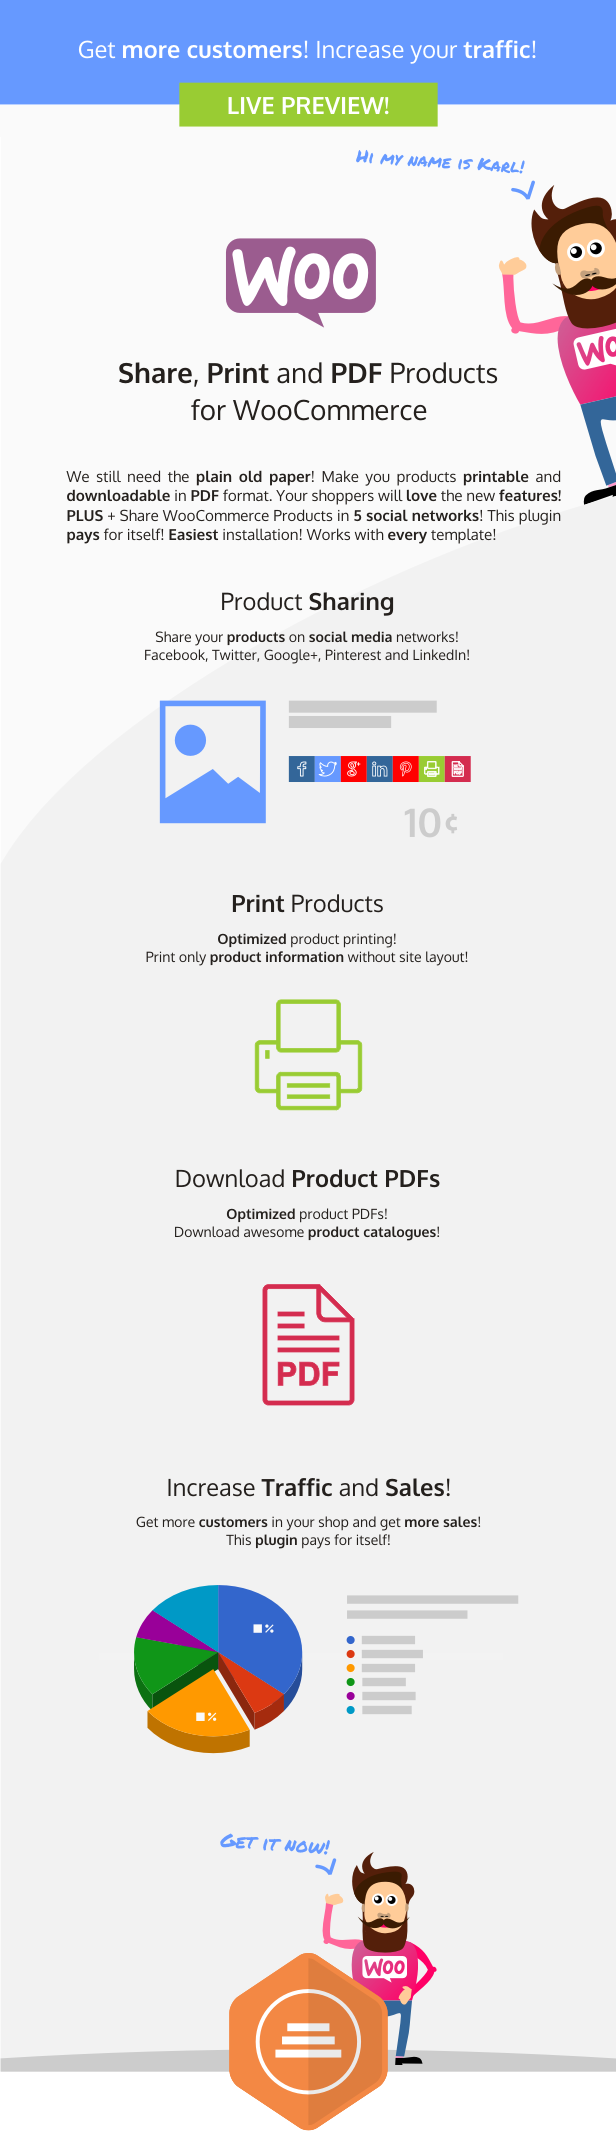 Share, Print and PDF Products for WooCommerce - 3